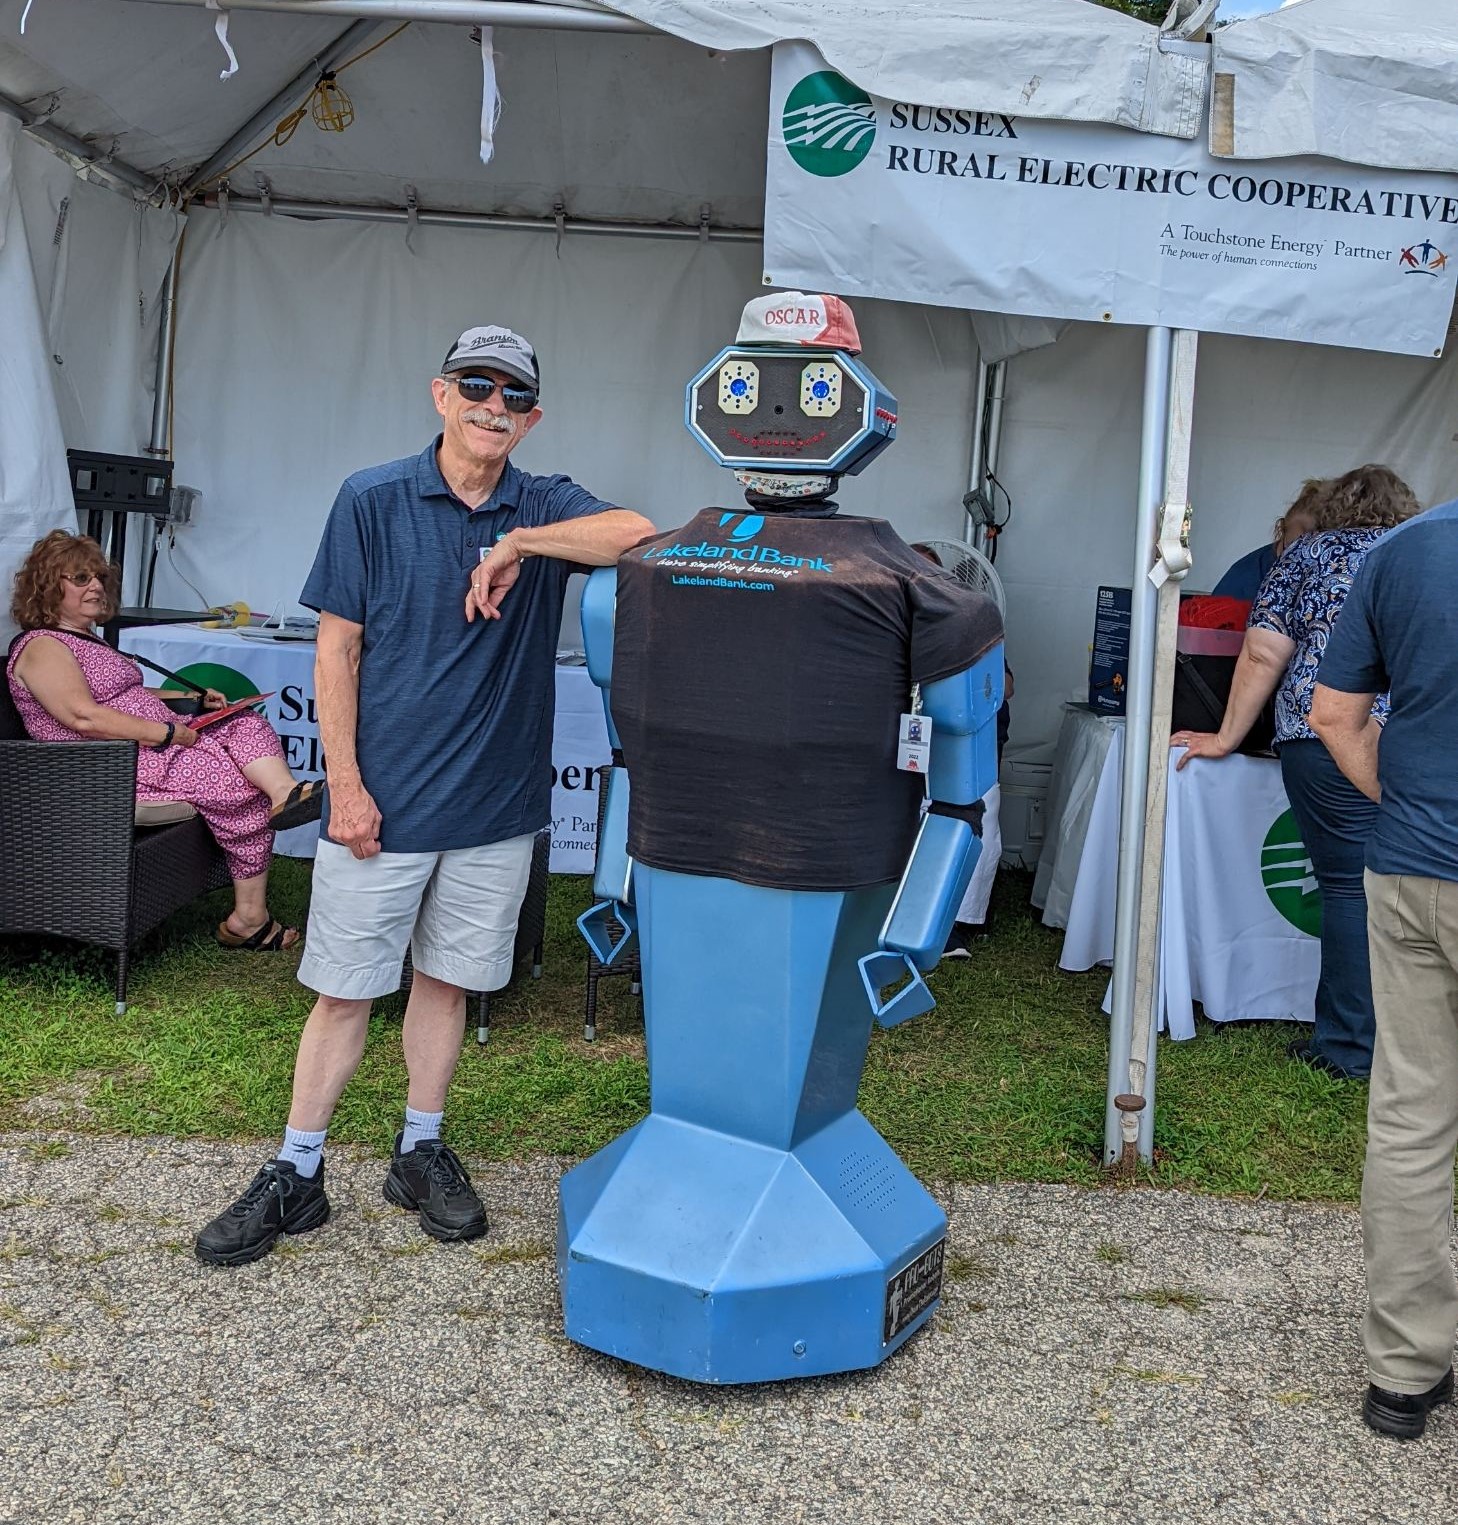 Chairman of SREC's Board of Directors, Jack Haggery, poses with Oscar the Robot at the Sussex County Fairgrounds